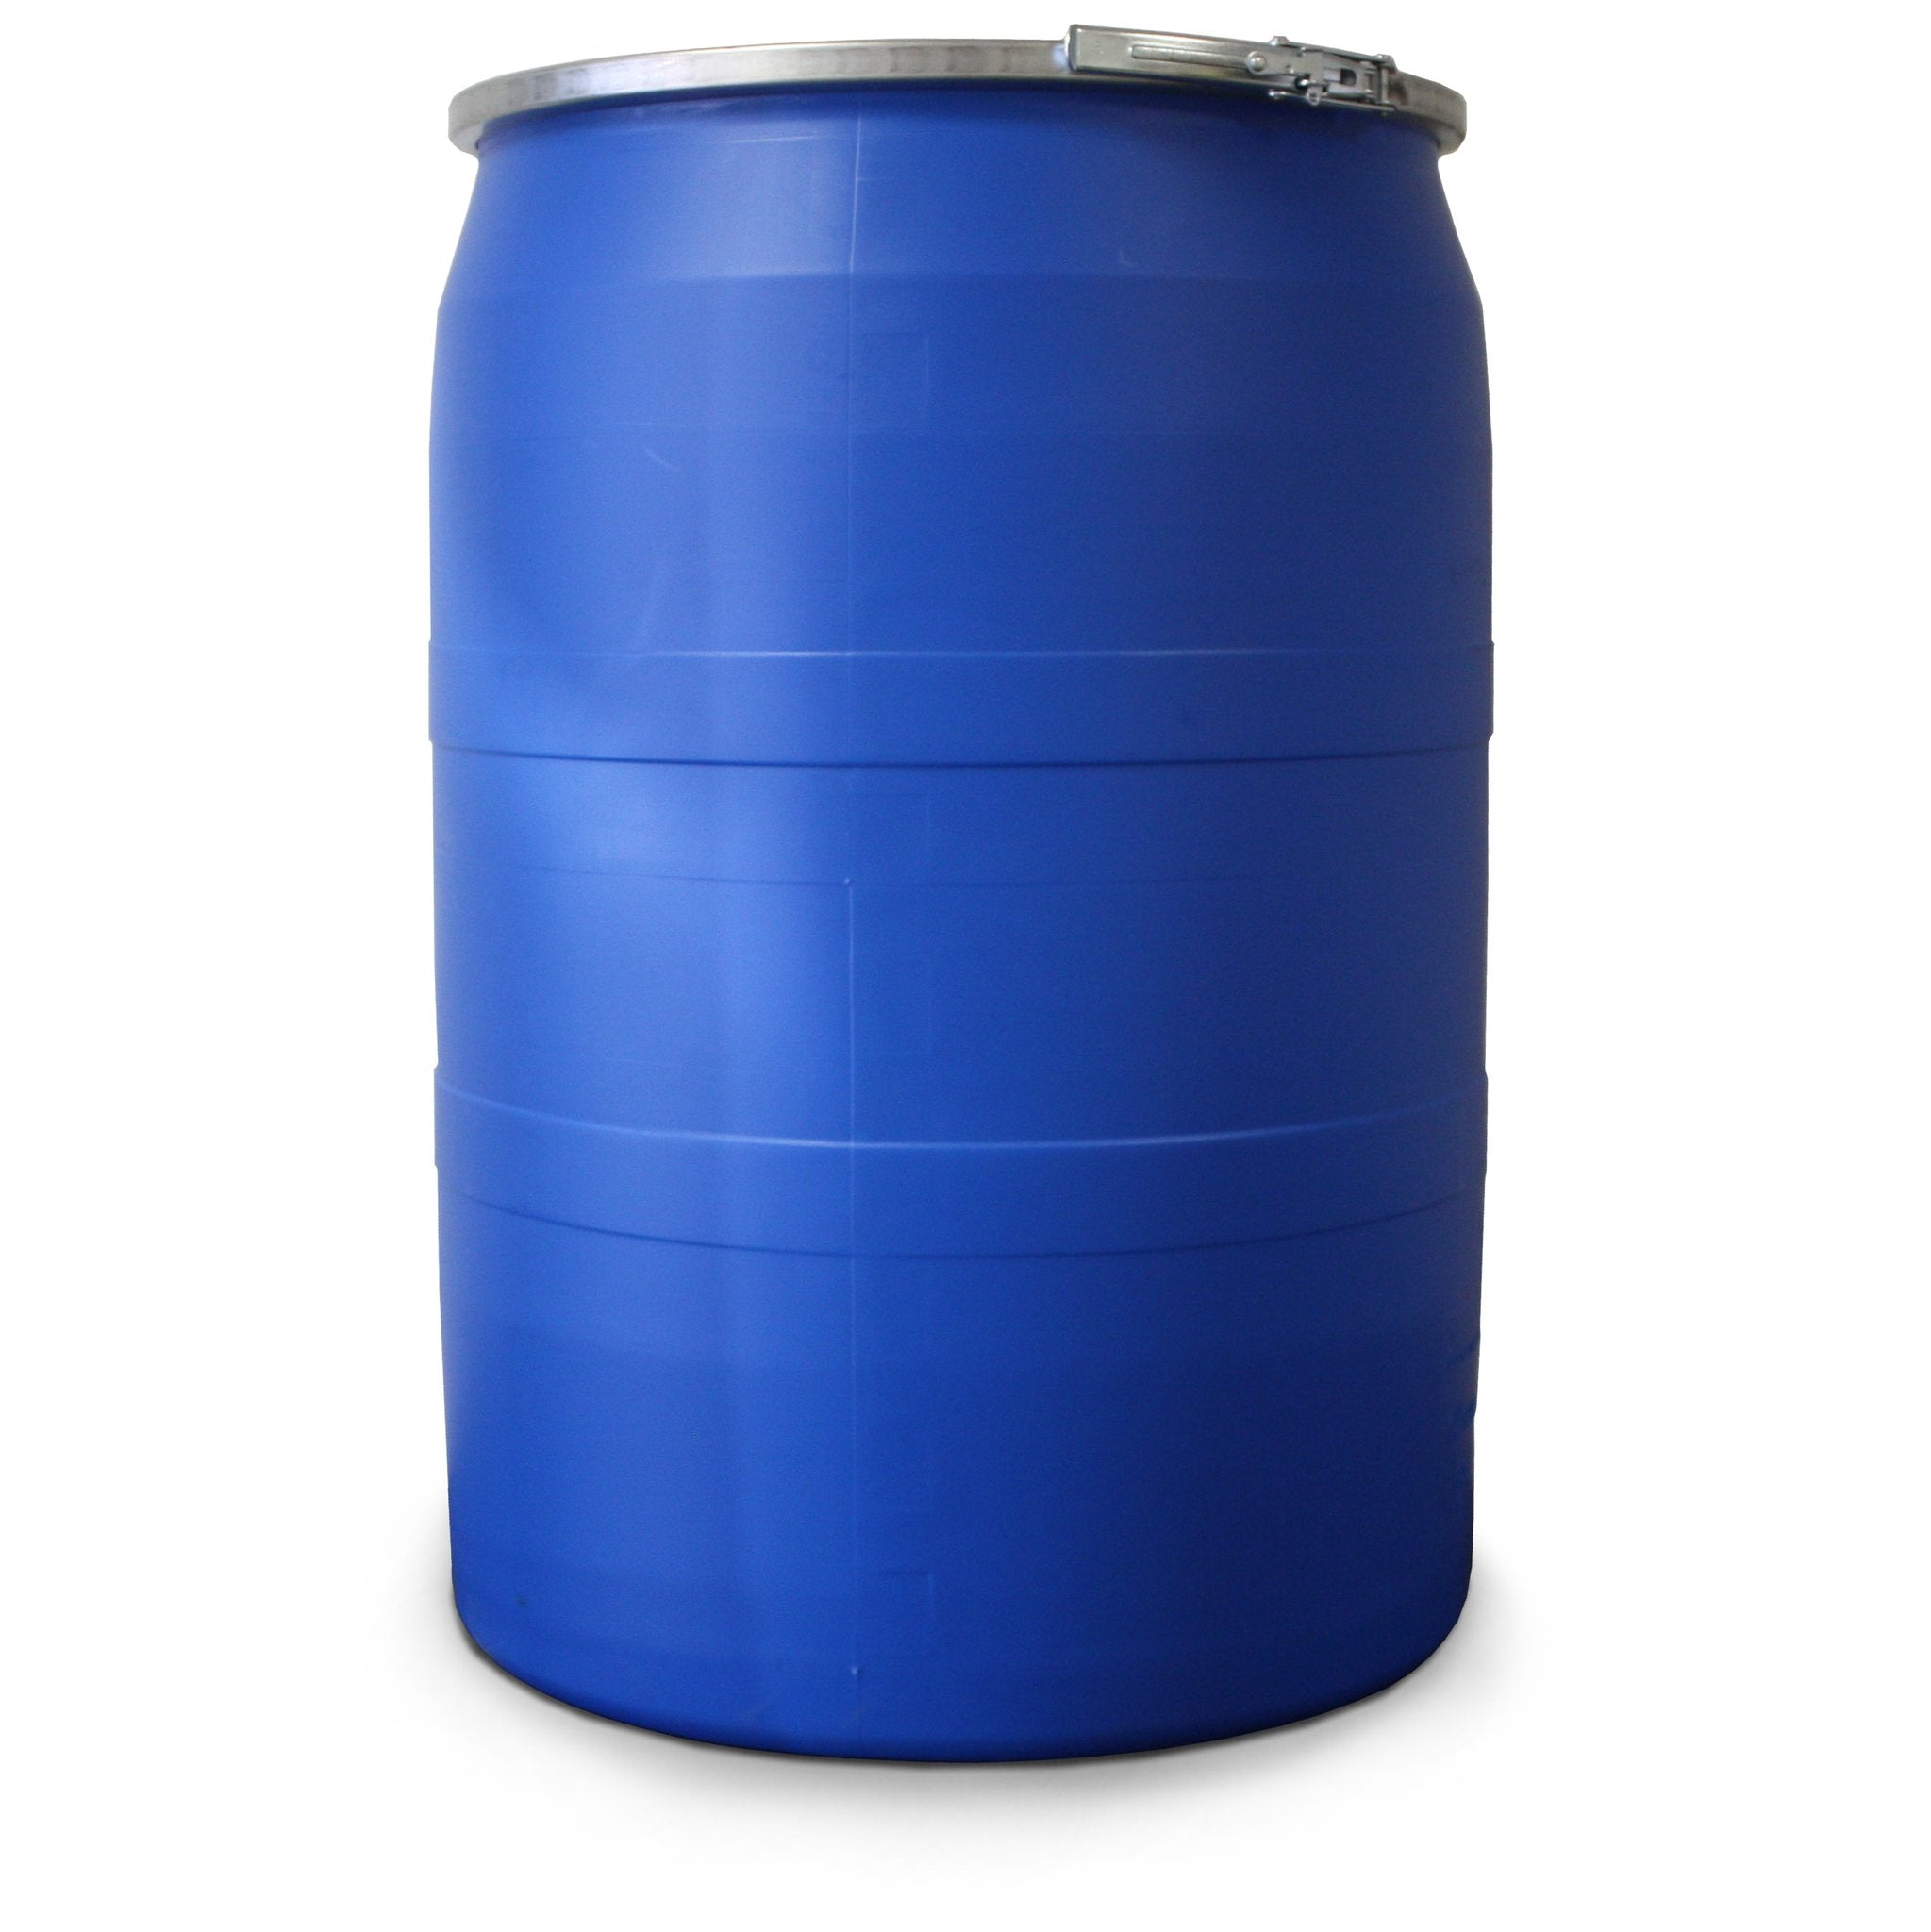 XSORB Outdoor All-Purpose 55 gal Drum - 1 EACH